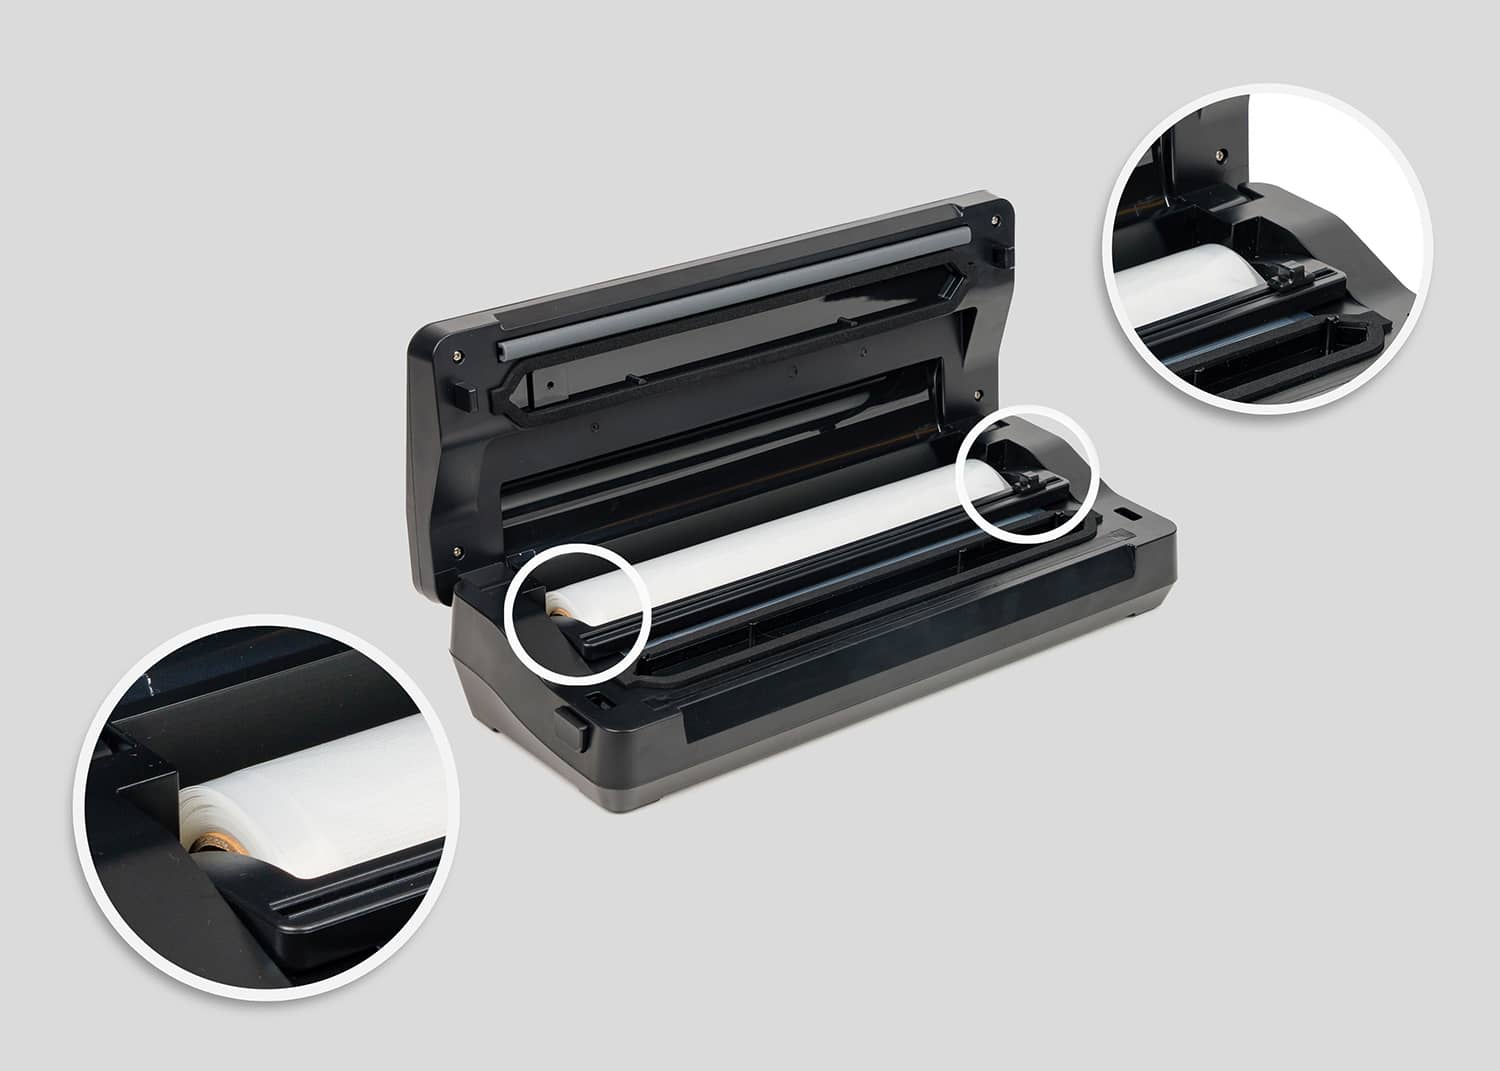 Inside the vacuum sealer, roll storage chamber and built-in cutter